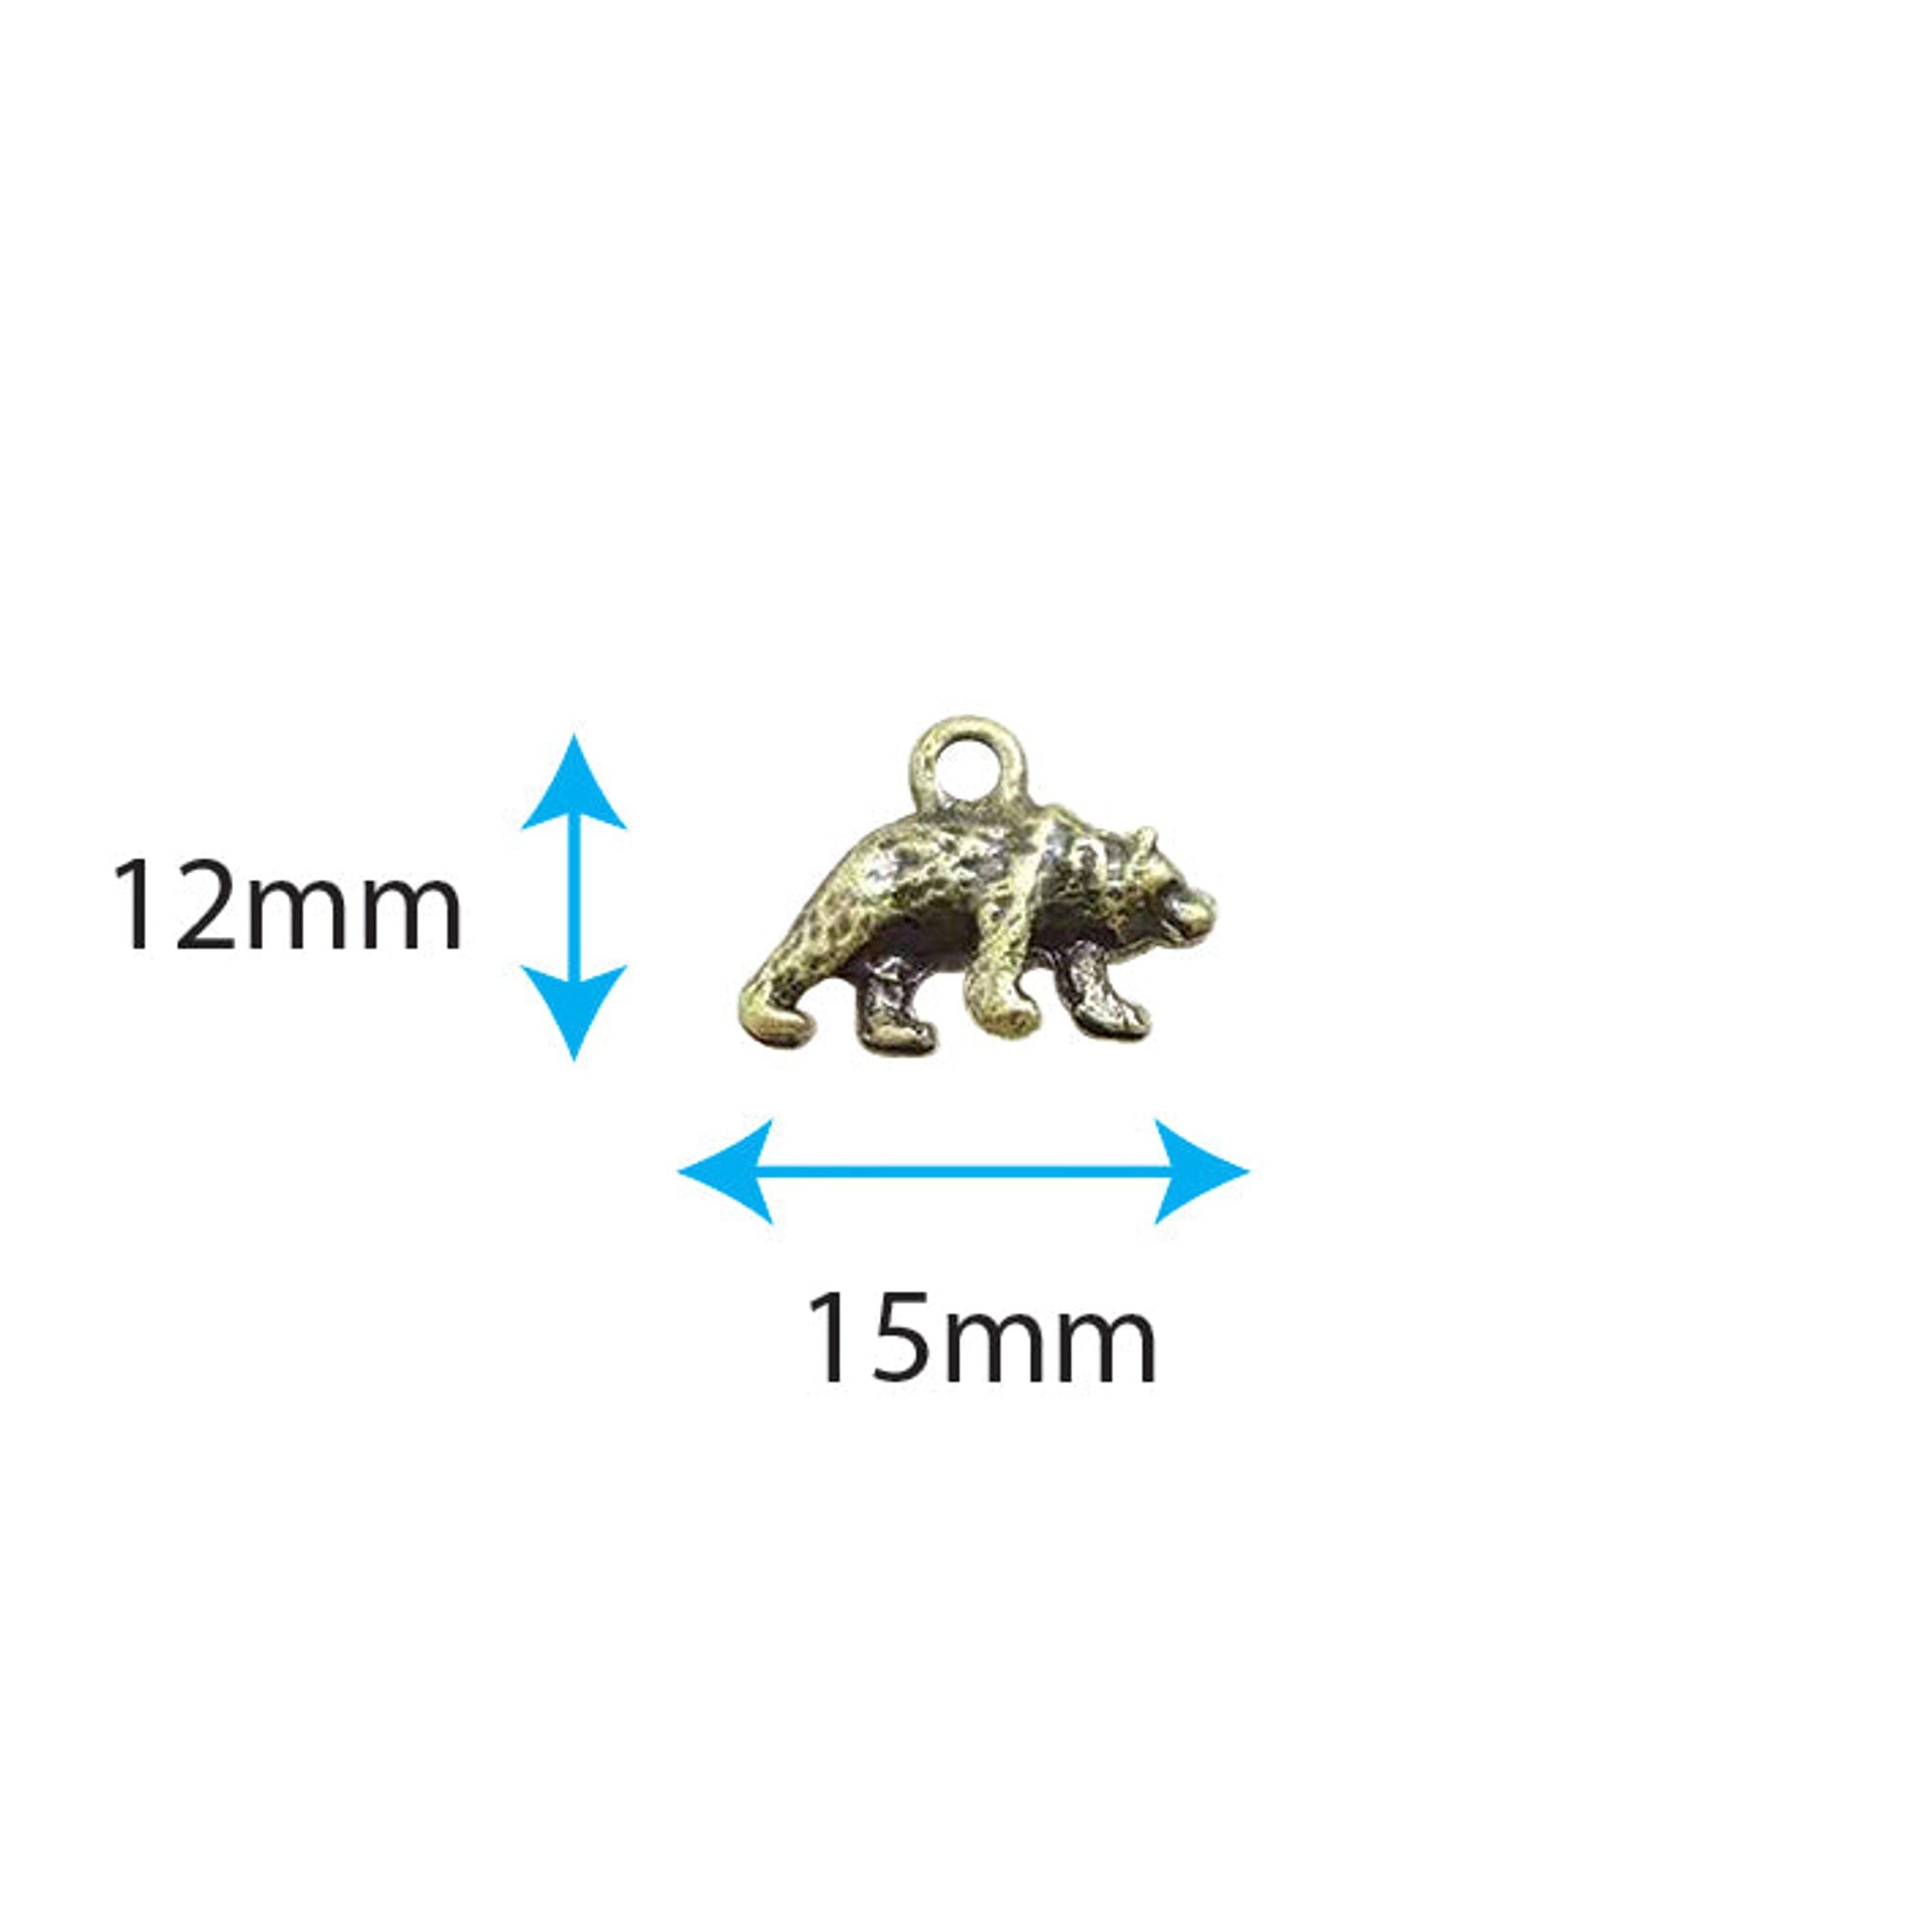 In The Forest - Metal Charms - Bear